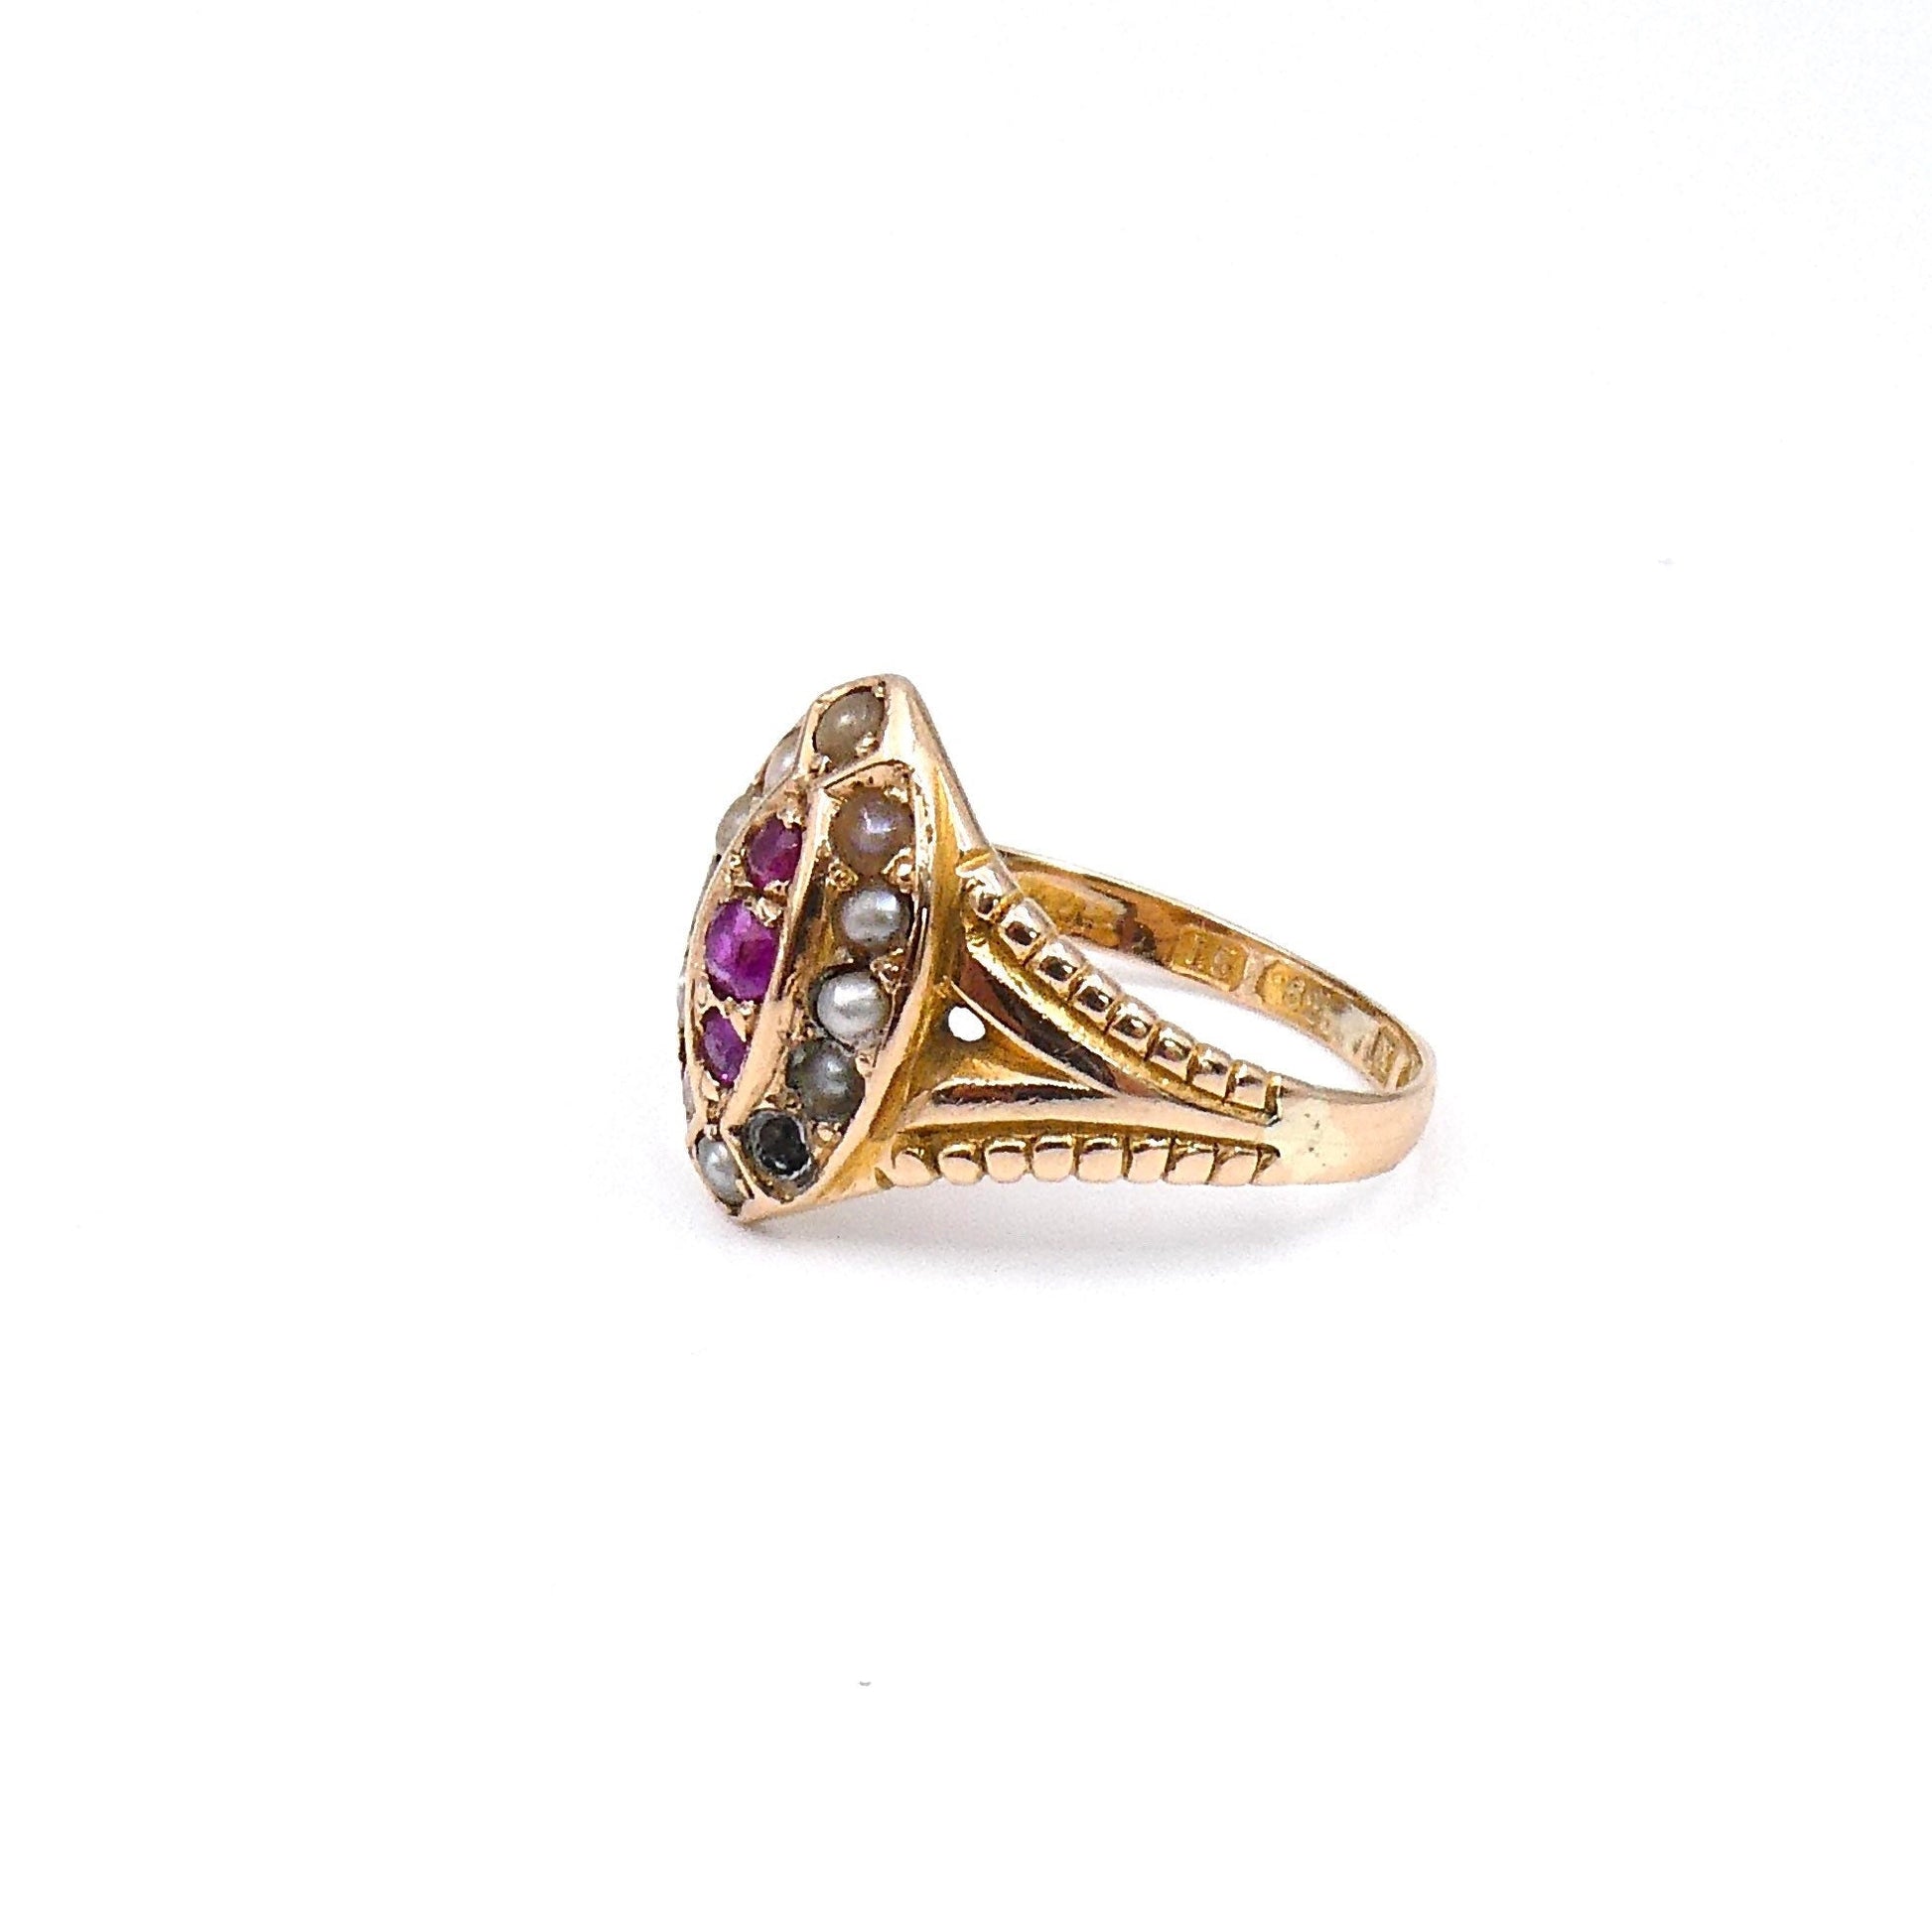 Antique ruby and pearl ring, a navette ring hallmarked 15kt gold - Collected